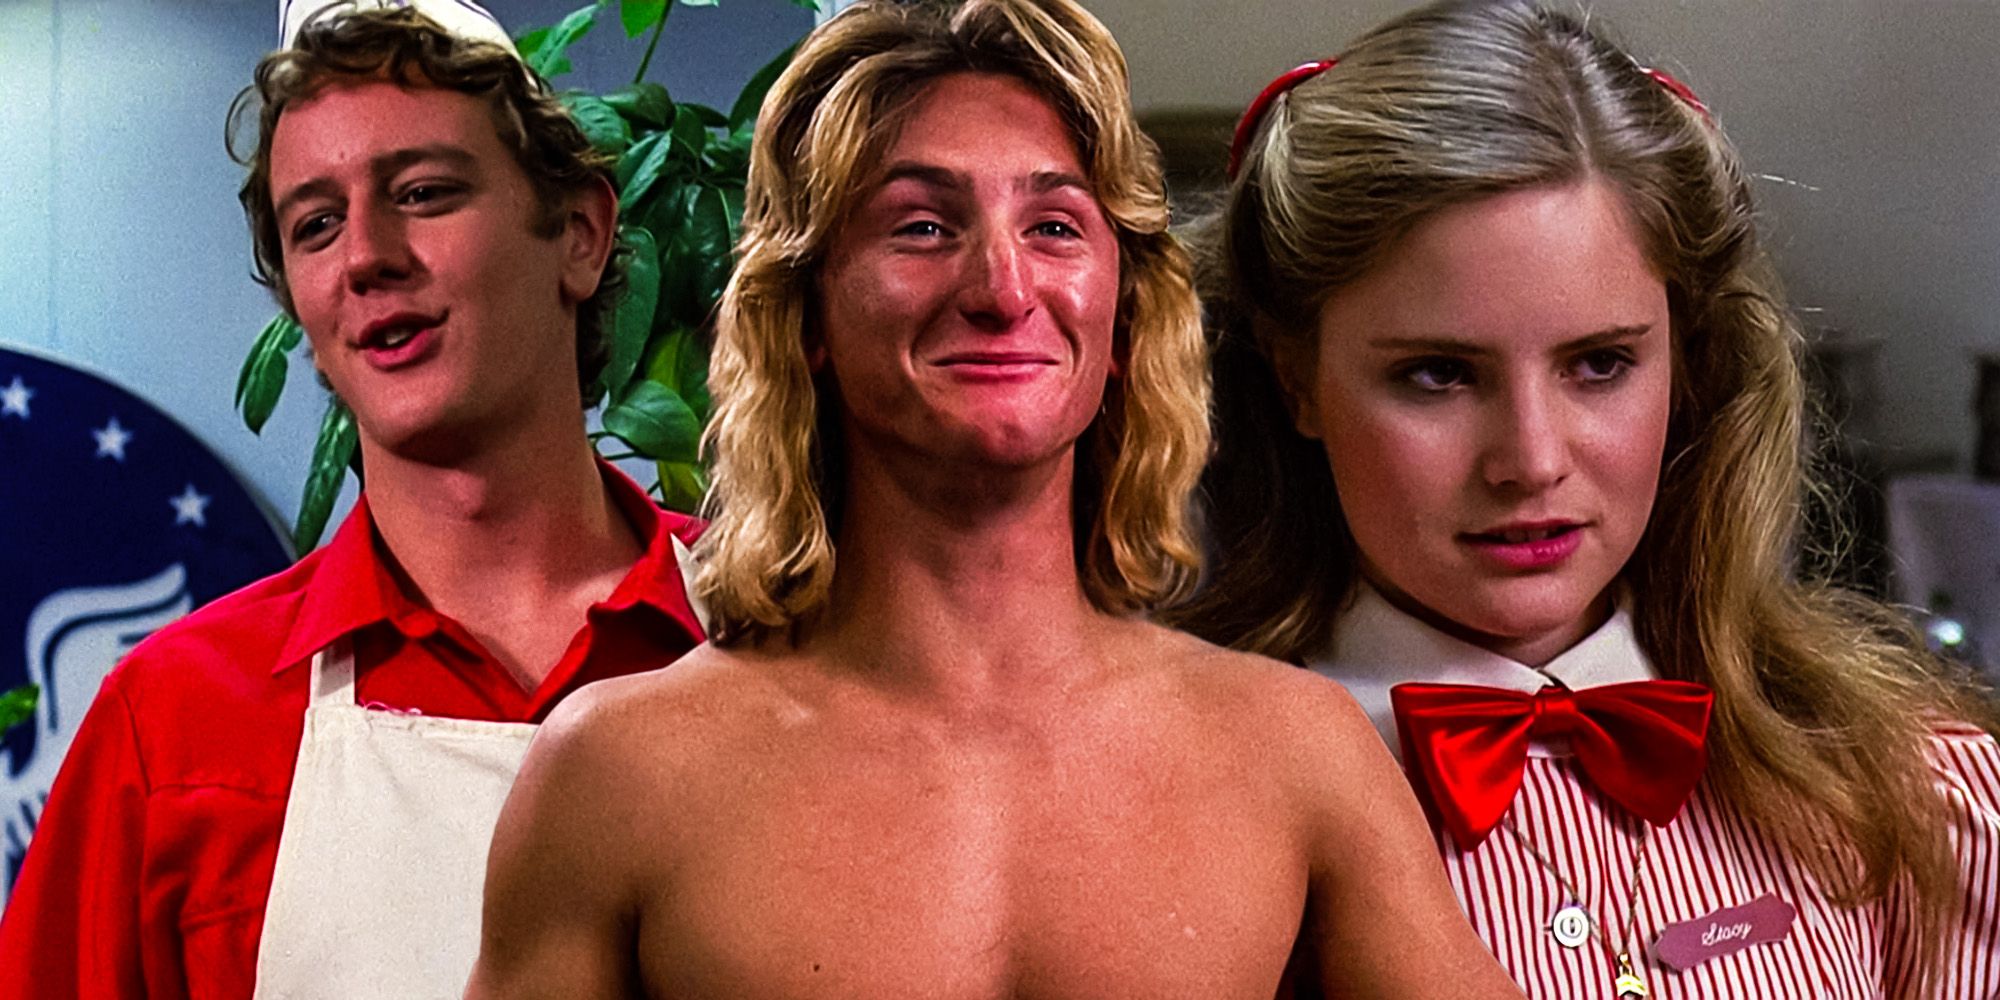 fast times at ridgemont high characters